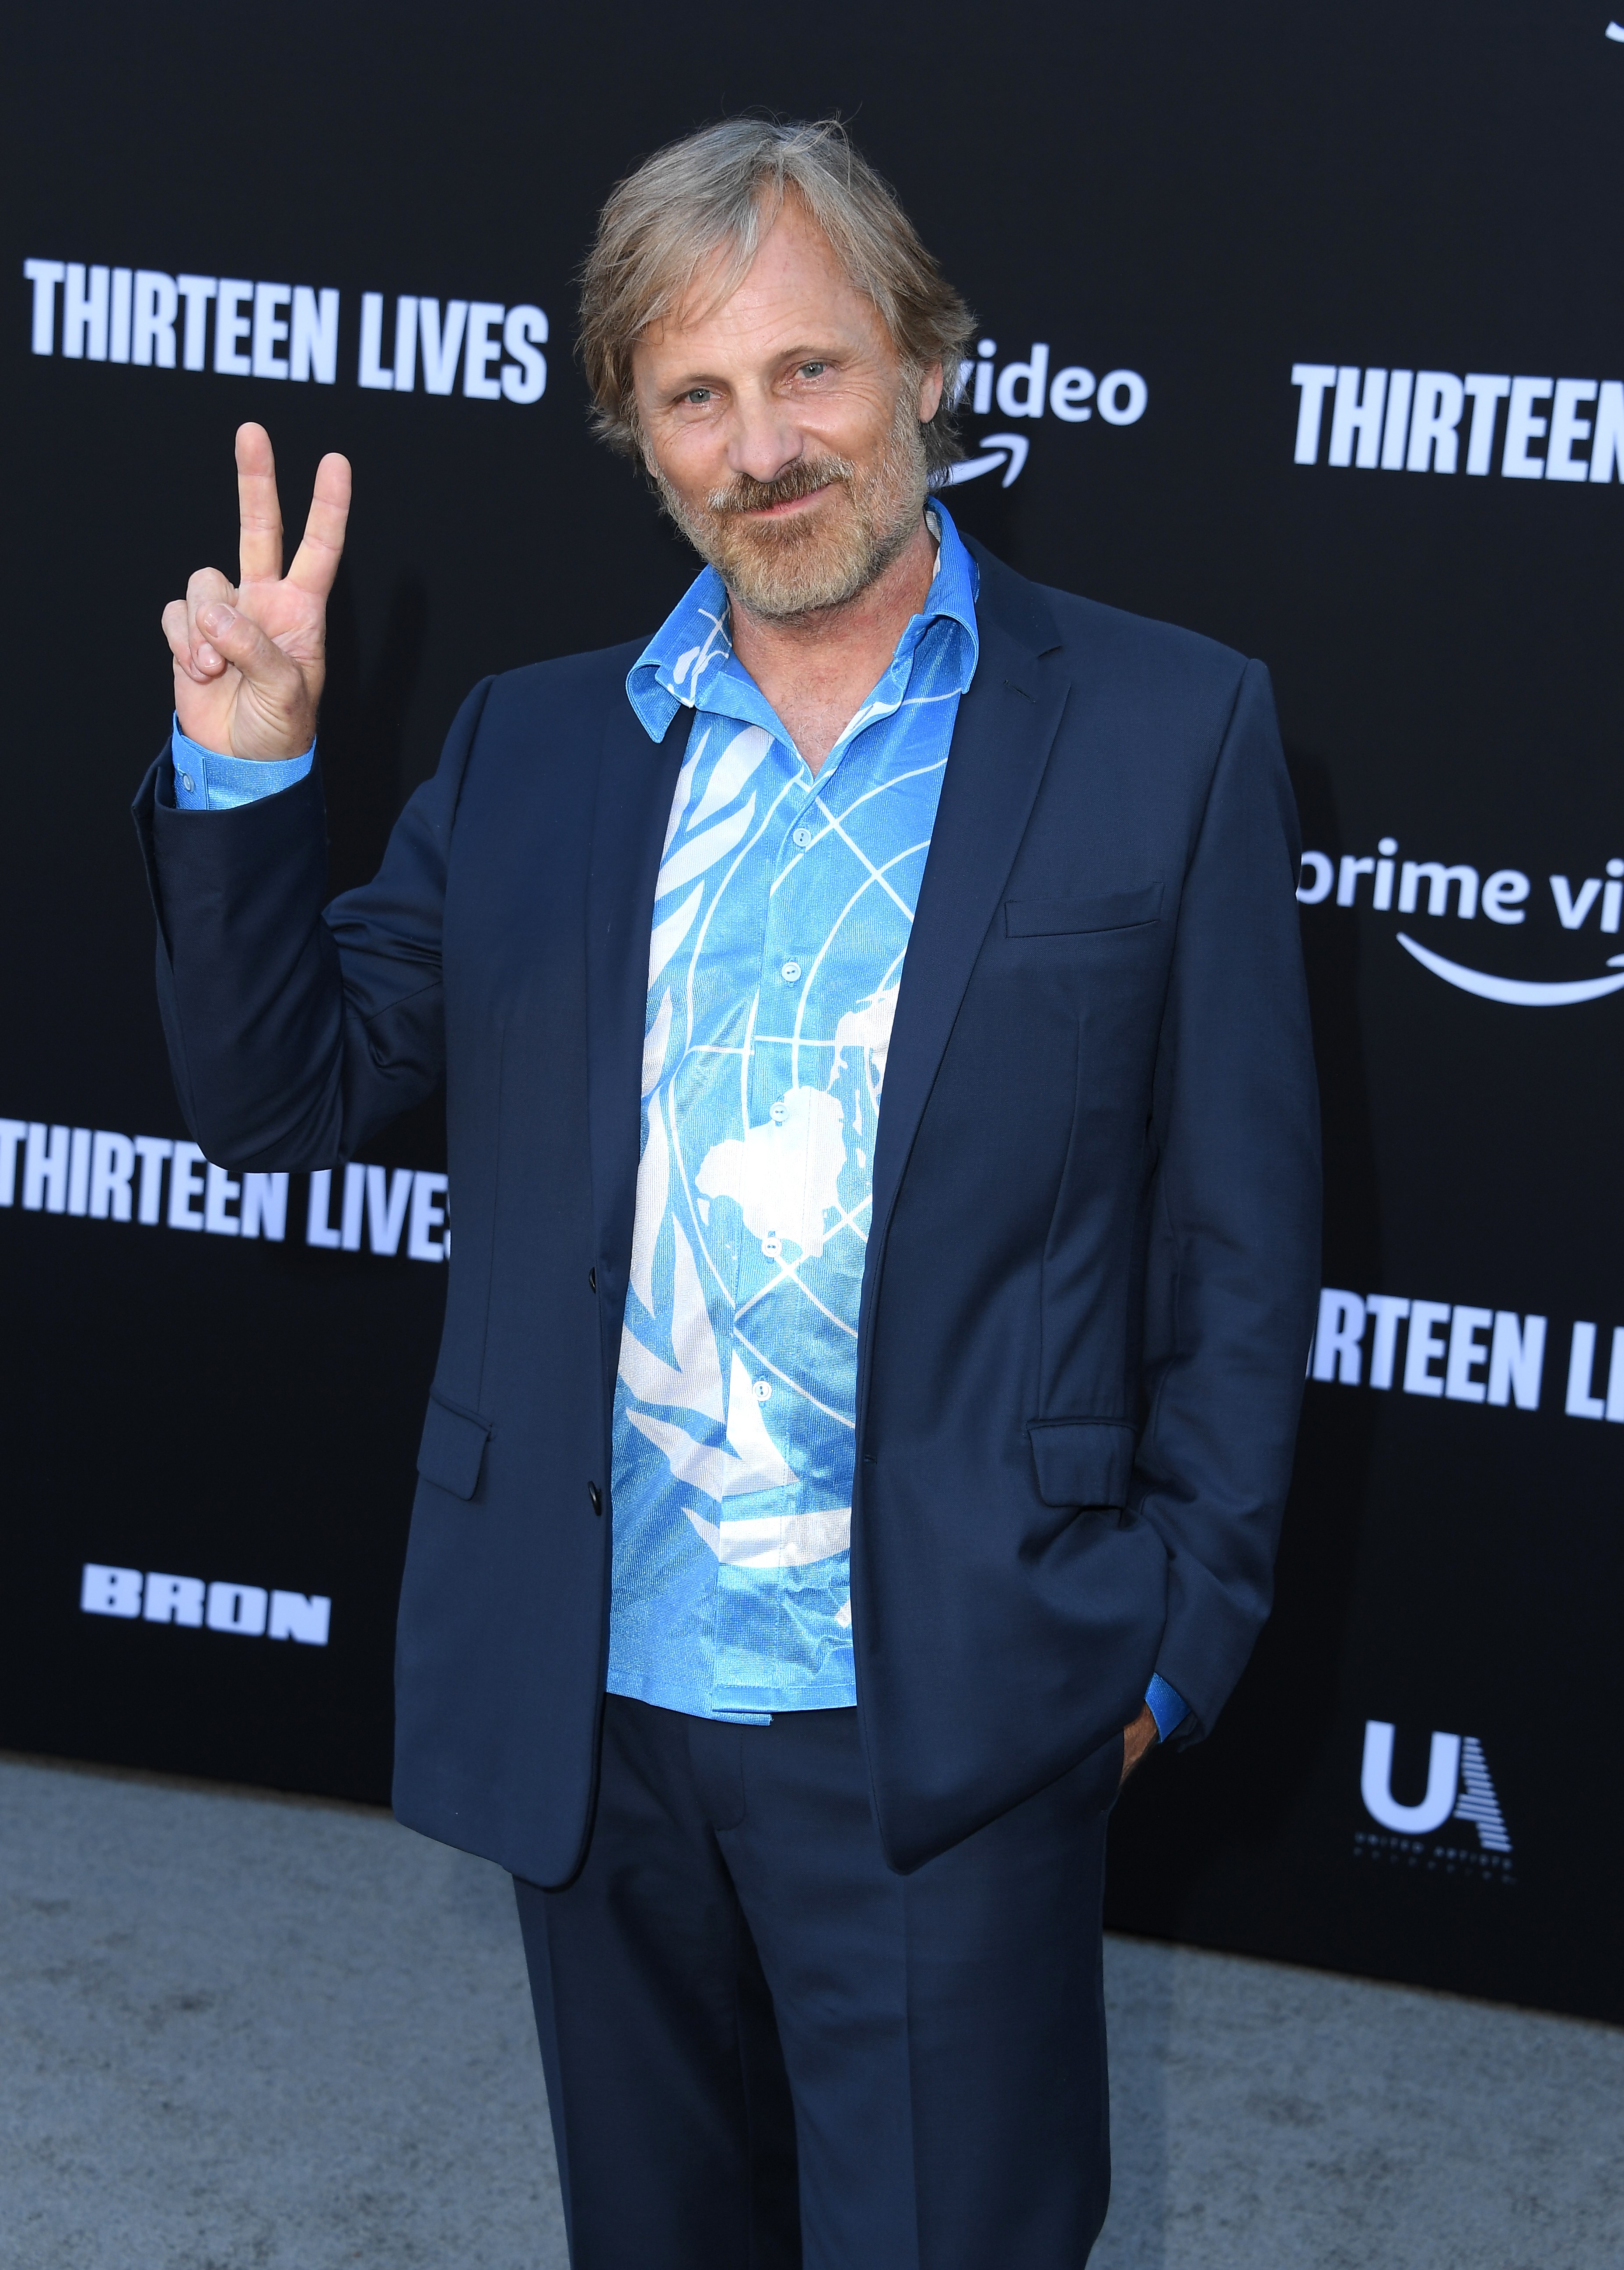 LOS ANGELES, CALIFORNIA - JULY 28: Viggo Mortensenarrives at the Premiere Of Prime Video's "Thirteen Lives"  at Westwood Village Theater on July 28, 2022 in Los Angeles, California. (Photo by Steve Granitz/FilmMagic) (Foto: FilmMagic)